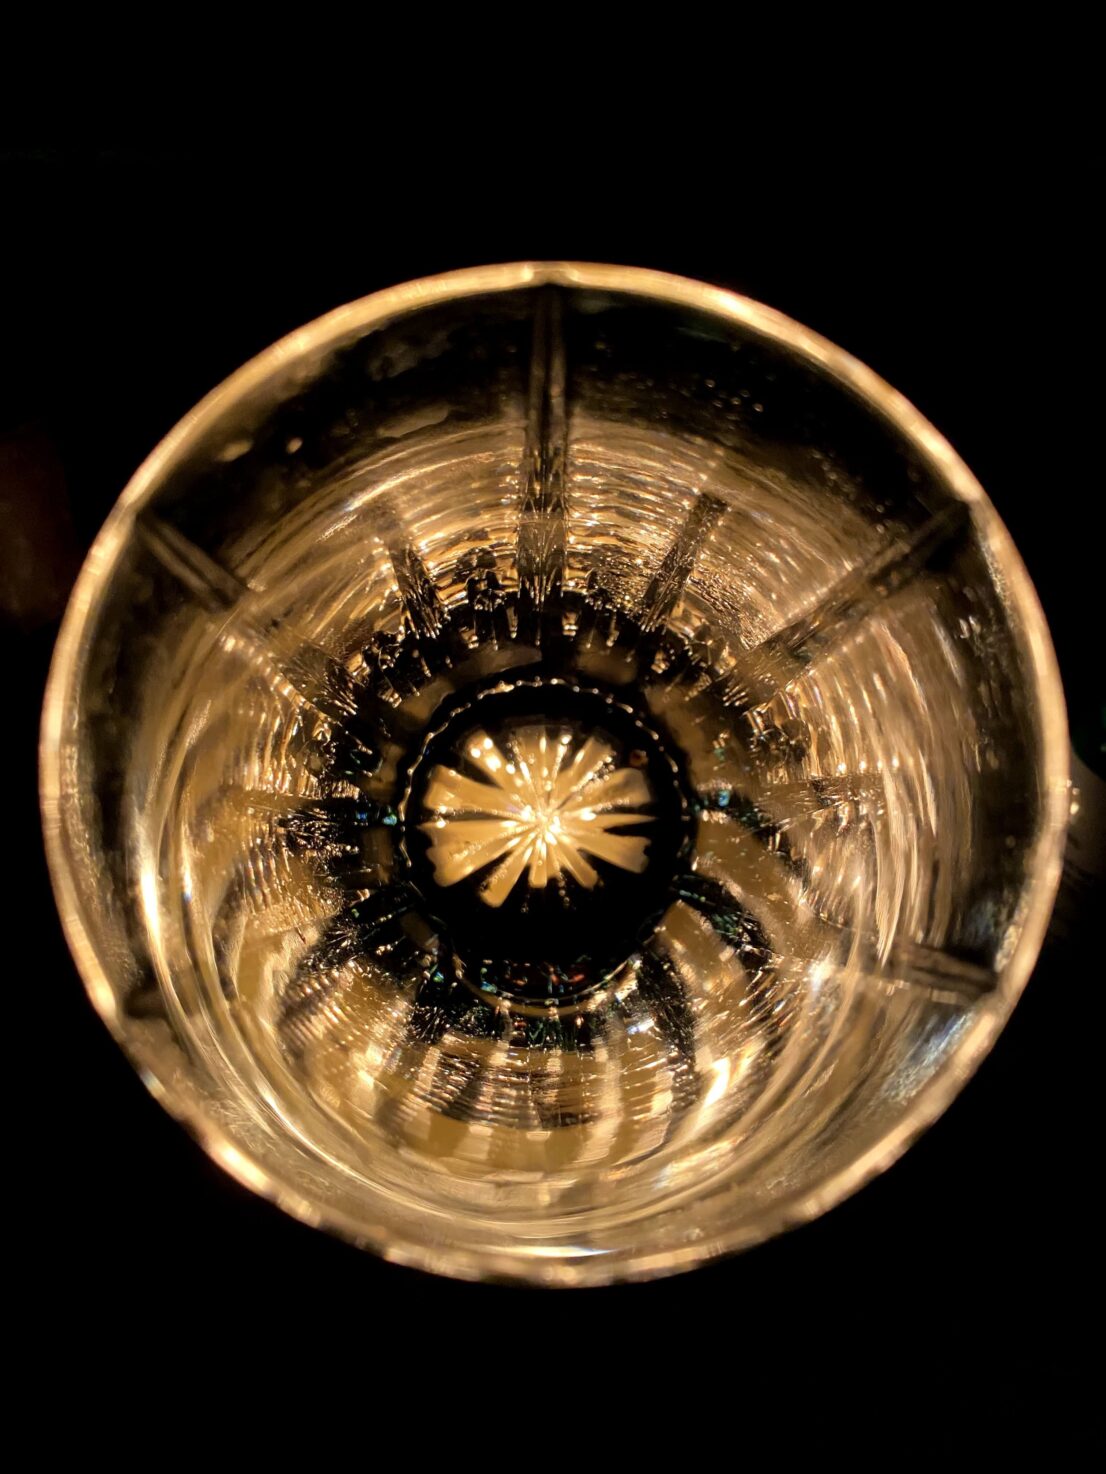 Image of a candle from above